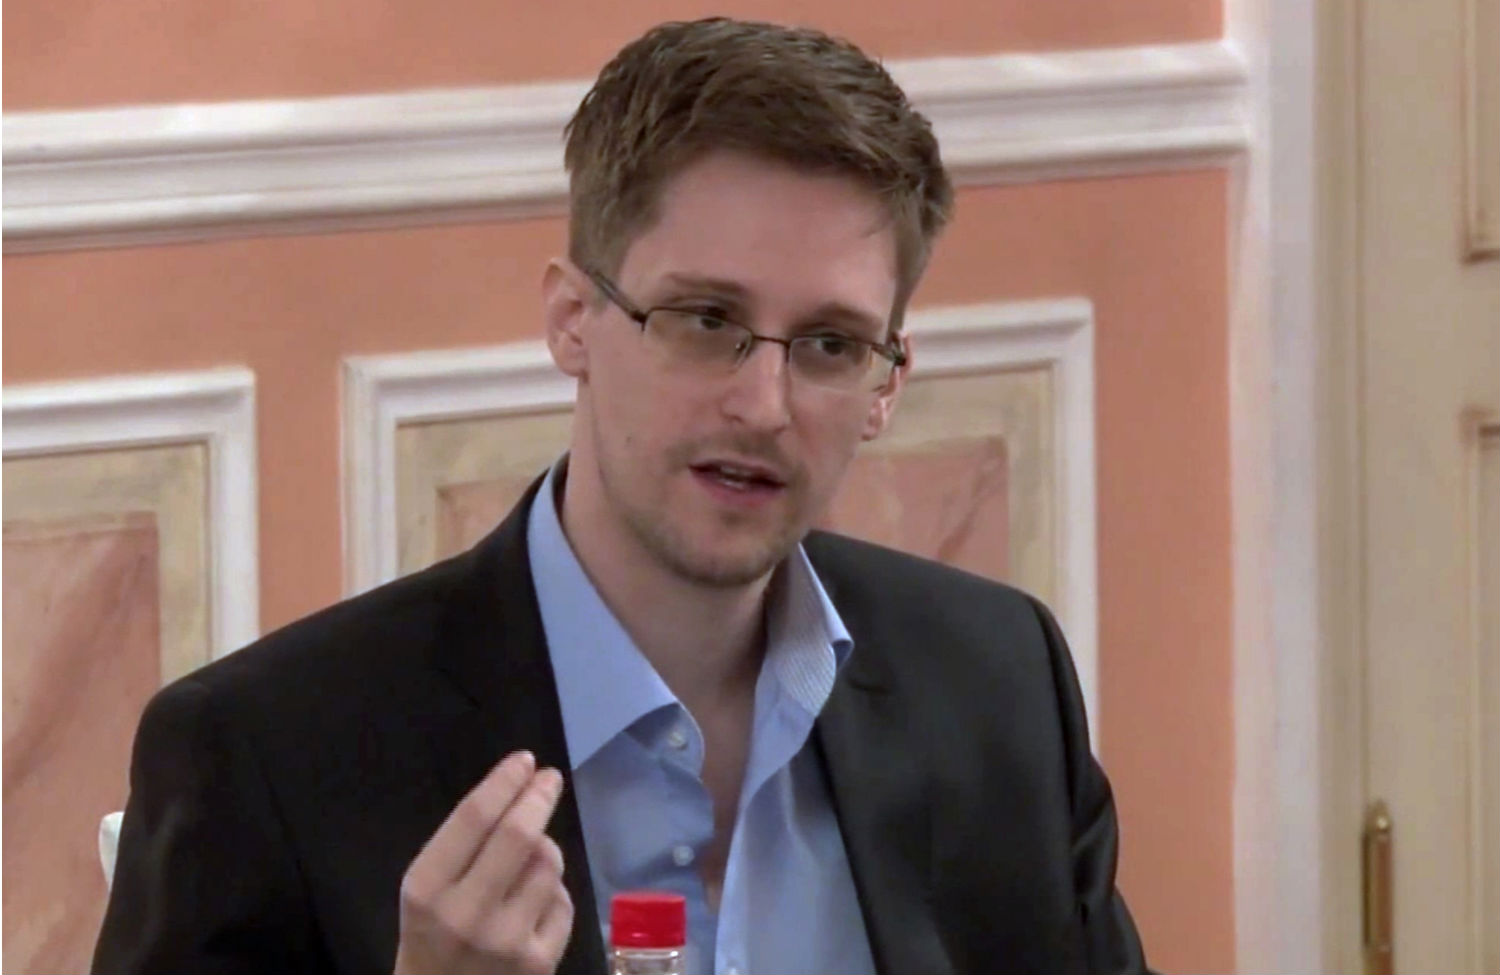 Edward Snowden and Laura Poitras Receive the Ridenhour Prize for Truth-Telling